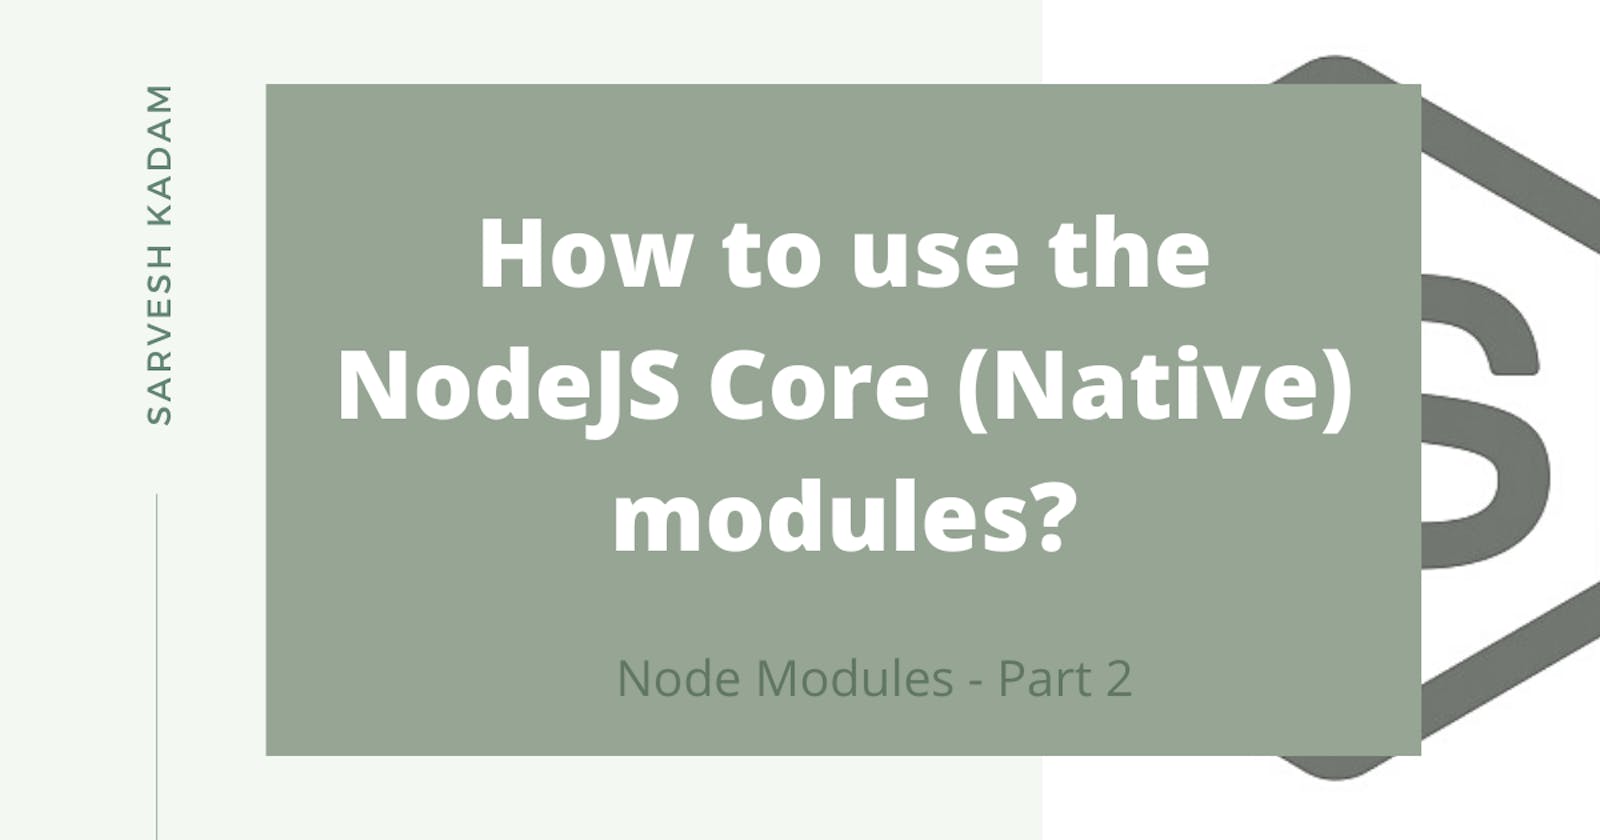 How to use the NodeJS Core (Native) modules?